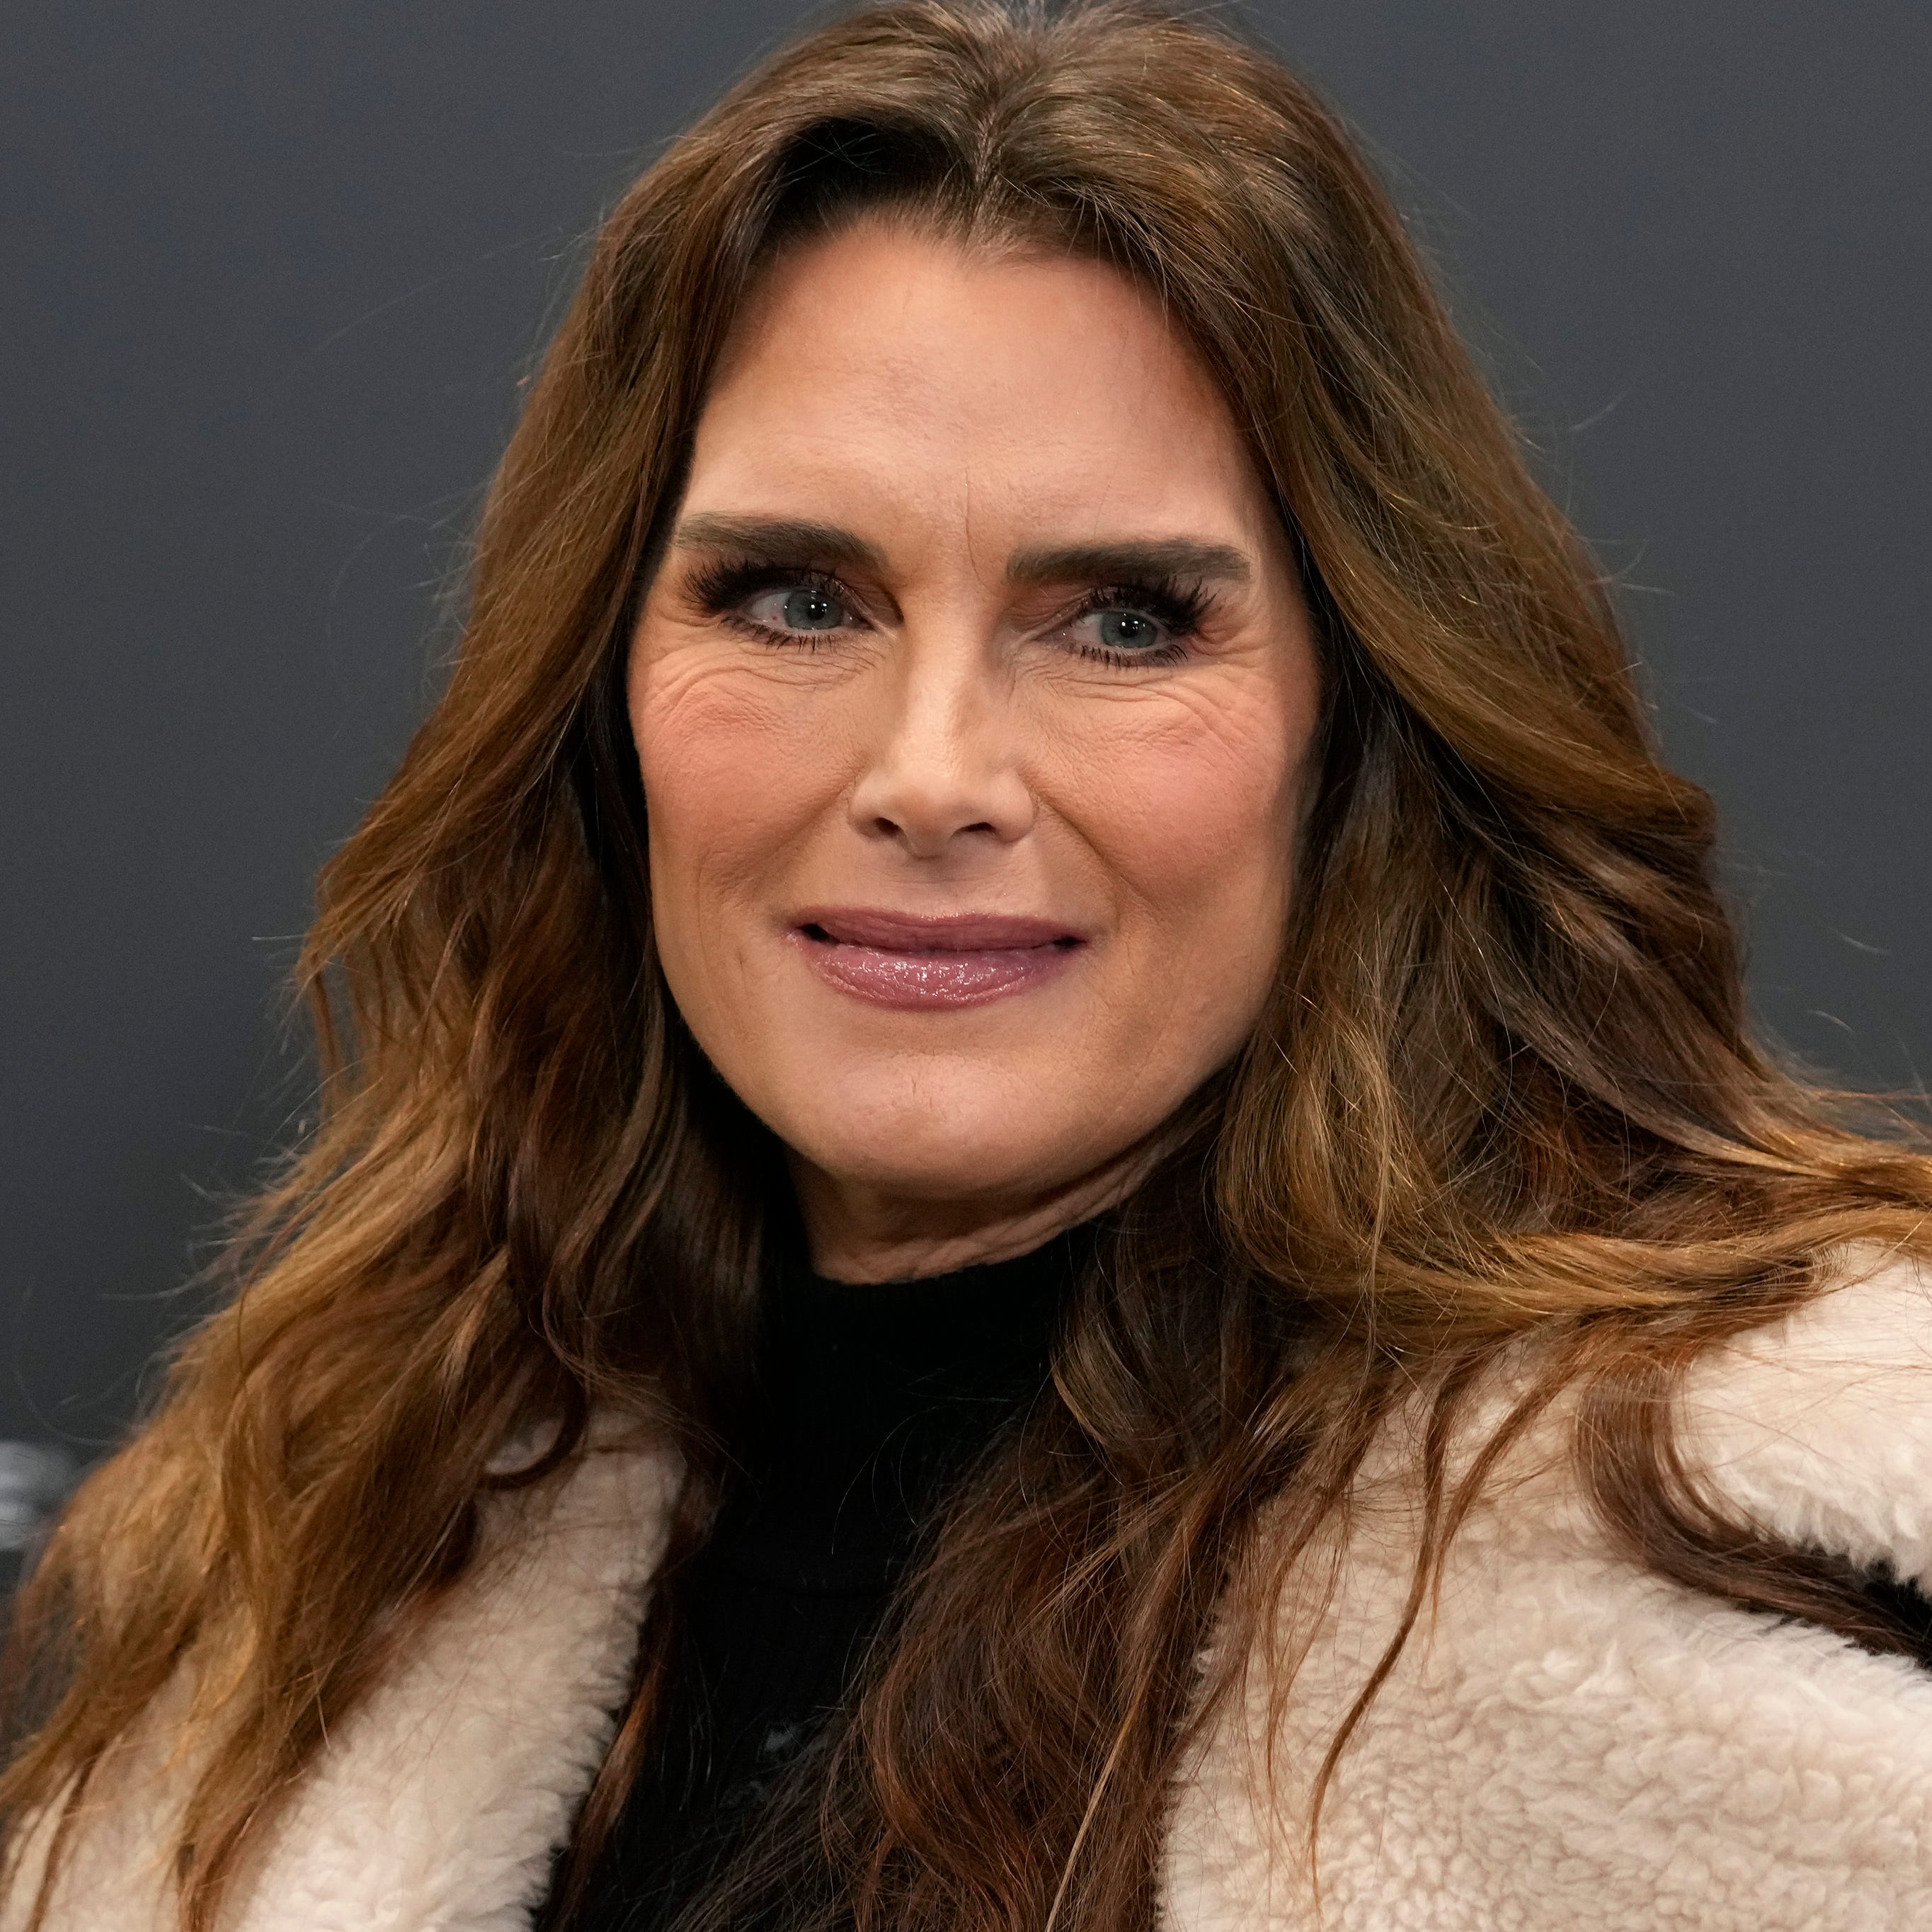 Brooke Shields, the subject of the documentary film "Pretty Baby: Brooke Shields," poses at the premiere of the film at the 2023 Sundance Film Festival in Park City, Utah.